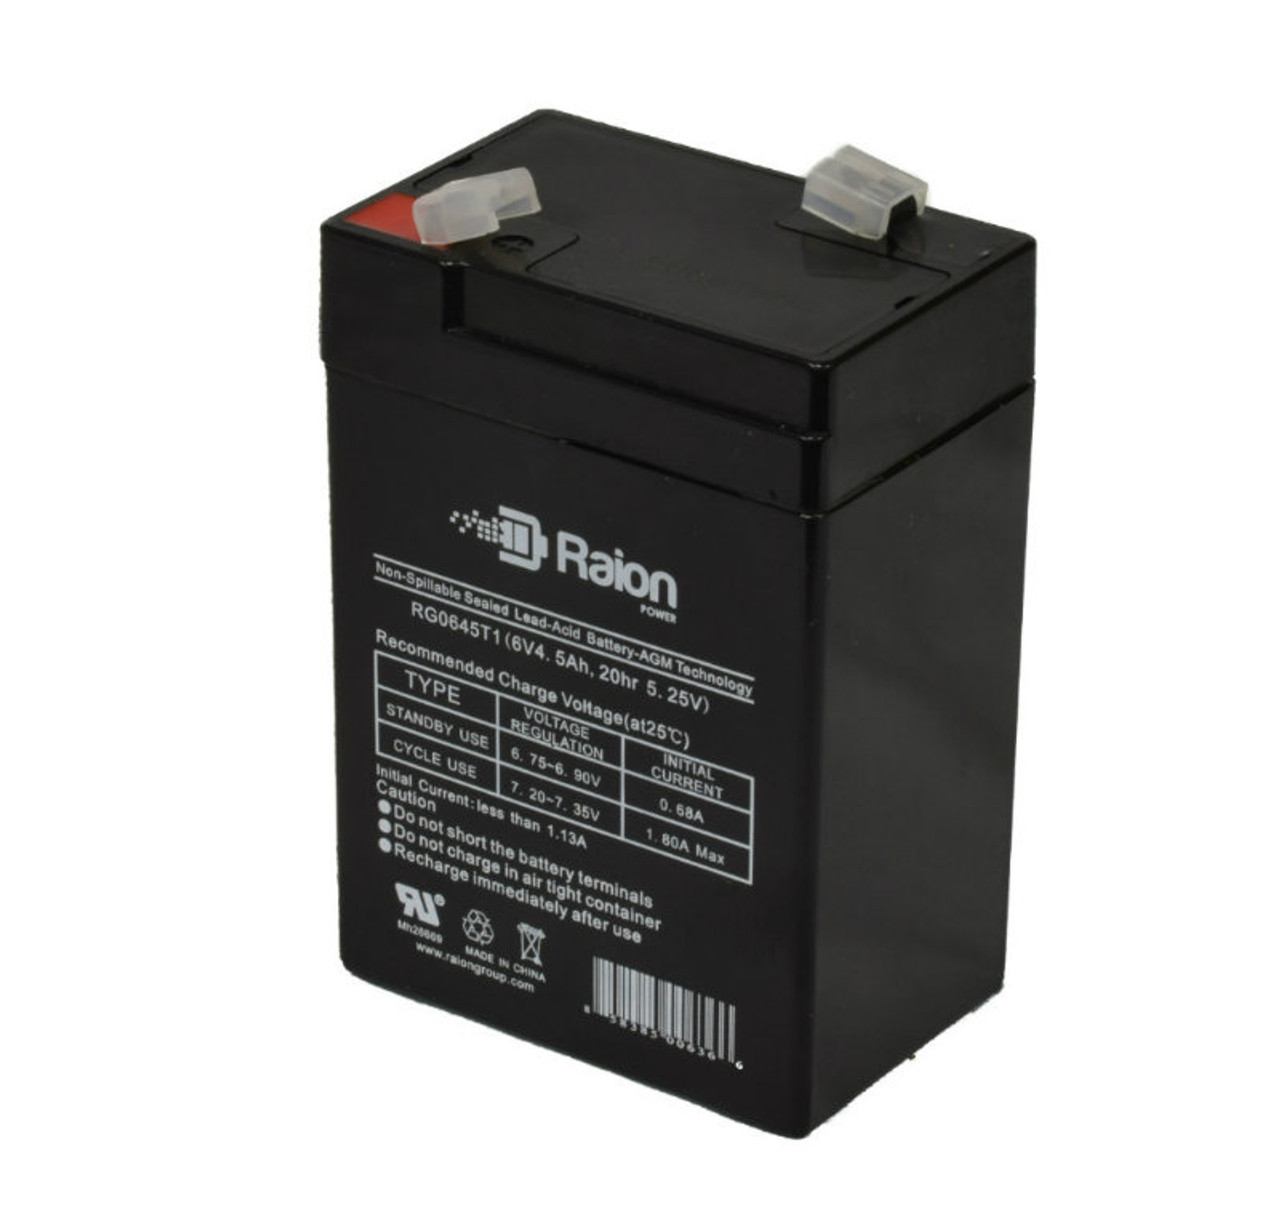 Raion Power RG0645T1 6V 4.5Ah Replacement Battery Cartridge for Oracle HD645